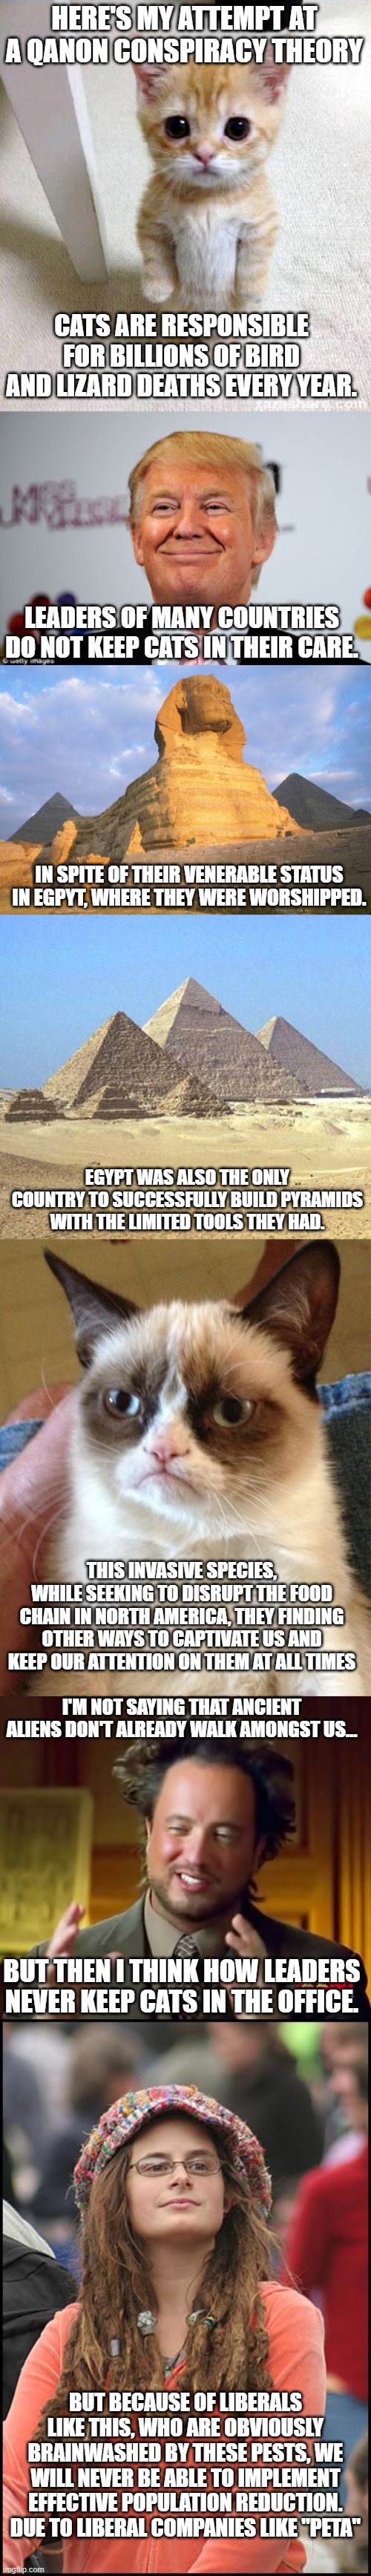 How do you think I did, guys? | HERE'S MY ATTEMPT AT A QANON CONSPIRACY THEORY; CATS ARE RESPONSIBLE FOR BILLIONS OF BIRD AND LIZARD DEATHS EVERY YEAR. LEADERS OF MANY COUNTRIES DO NOT KEEP CATS IN THEIR CARE. IN SPITE OF THEIR VENERABLE STATUS IN EGPYT, WHERE THEY WERE WORSHIPPED. EGYPT WAS ALSO THE ONLY COUNTRY TO SUCCESSFULLY BUILD PYRAMIDS WITH THE LIMITED TOOLS THEY HAD. THIS INVASIVE SPECIES, WHILE SEEKING TO DISRUPT THE FOOD CHAIN IN NORTH AMERICA, THEY FINDING OTHER WAYS TO CAPTIVATE US AND KEEP OUR ATTENTION ON THEM AT ALL TIMES; I'M NOT SAYING THAT ANCIENT ALIENS DON'T ALREADY WALK AMONGST US... BUT THEN I THINK HOW LEADERS NEVER KEEP CATS IN THE OFFICE. BUT BECAUSE OF LIBERALS LIKE THIS, WHO ARE OBVIOUSLY BRAINWASHED BY THESE PESTS, WE WILL NEVER BE ABLE TO IMPLEMENT EFFECTIVE POPULATION REDUCTION. DUE TO LIBERAL COMPANIES LIKE "PETA" | image tagged in memes,cute cat,donald trump approves,sphinx mullet,pyramids,grumpy cat | made w/ Imgflip meme maker